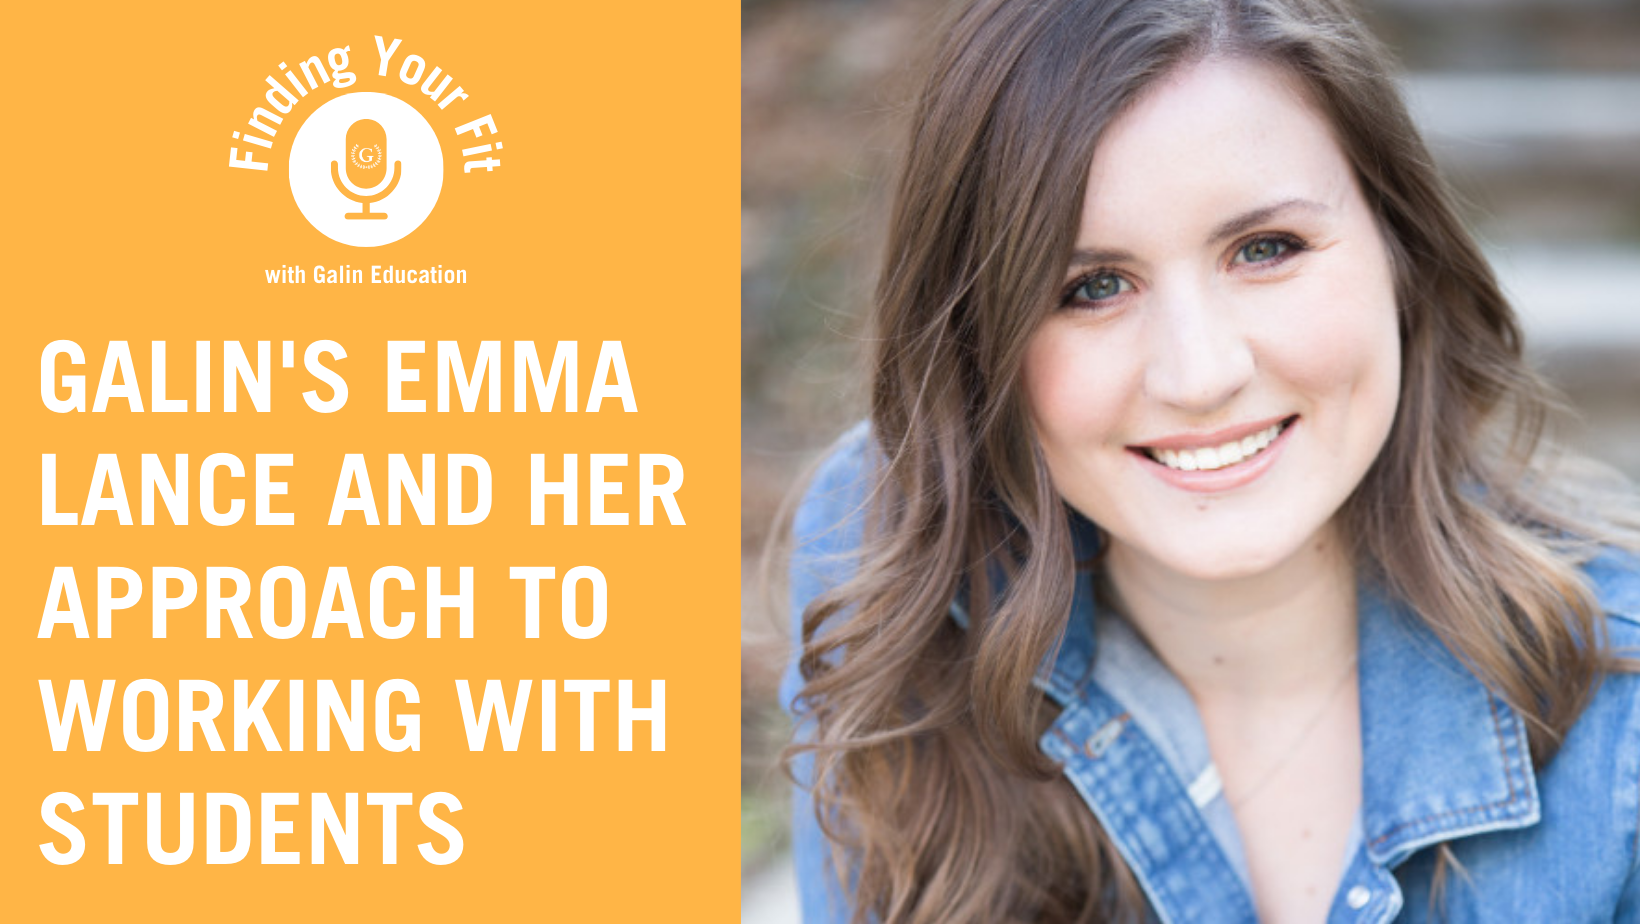 Finding Your Fit: Galin’s Emma Lance and Her Approach to Working with Students